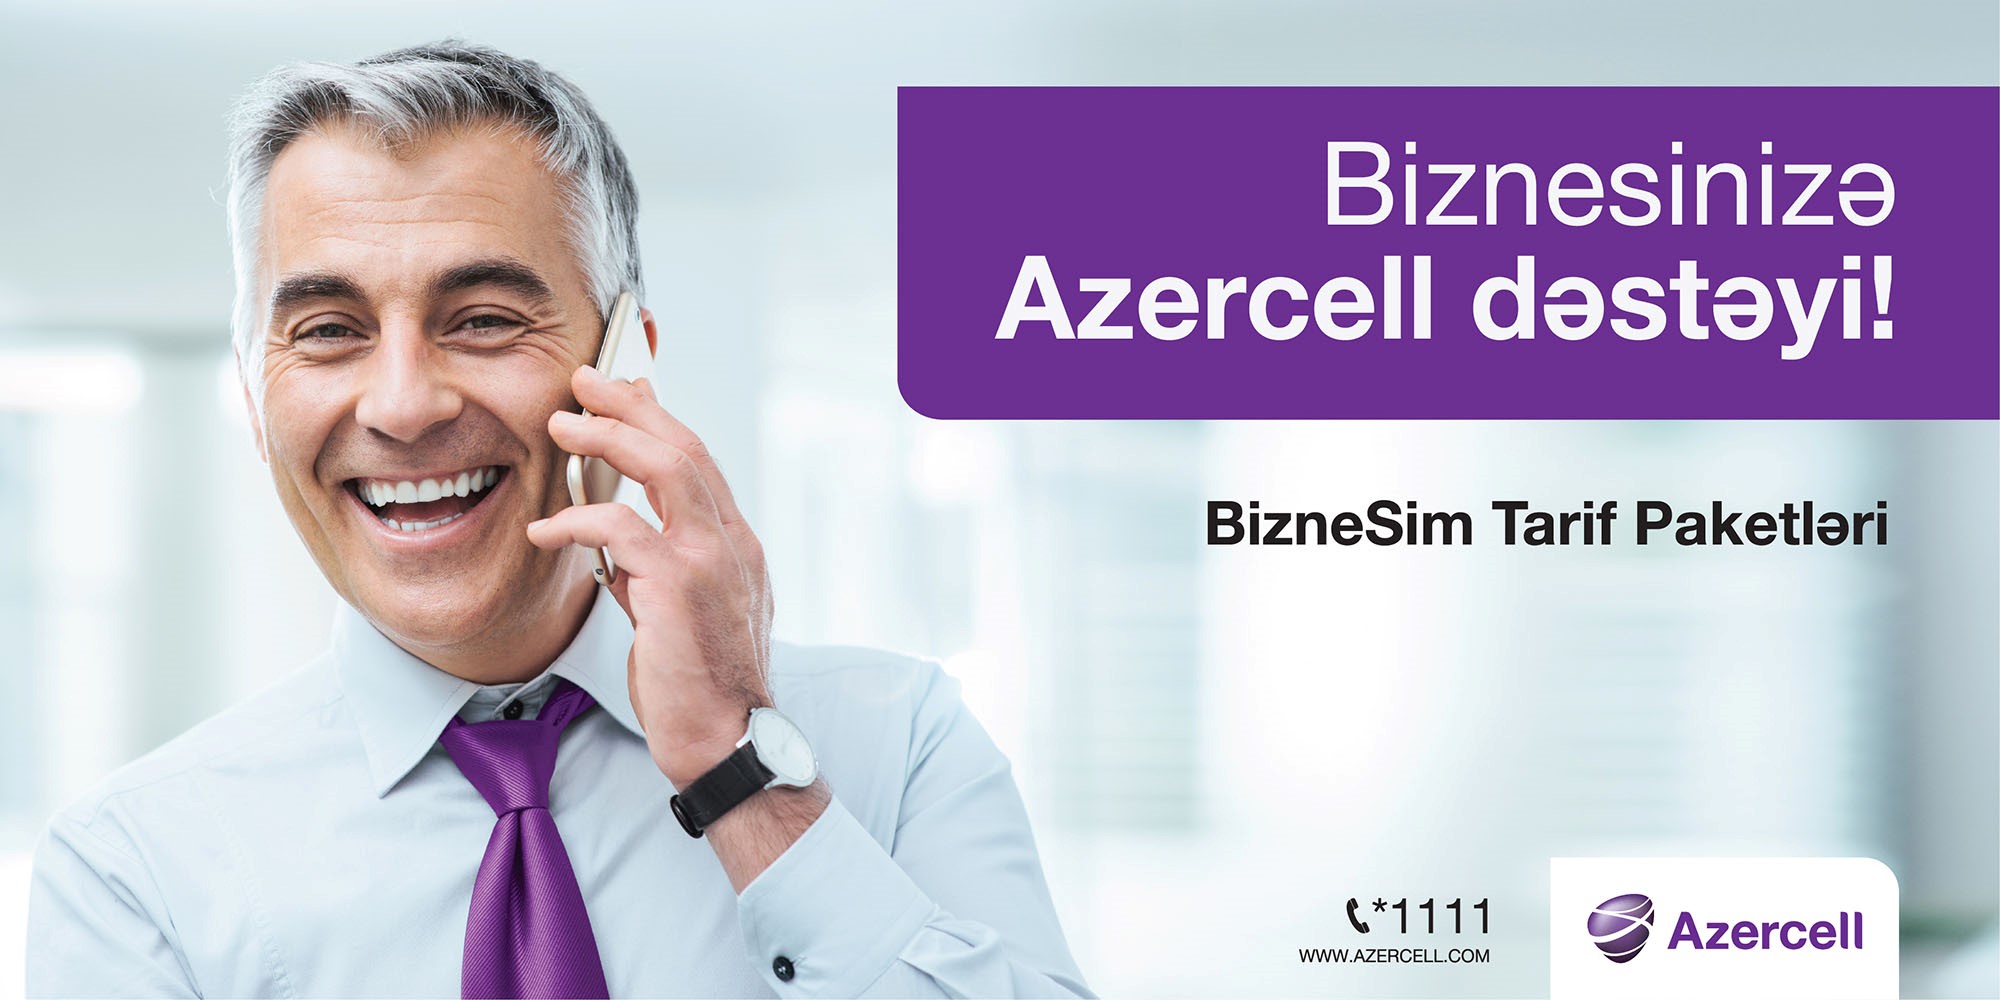 Azercell unveils new business identity and presents new digital product portfolio